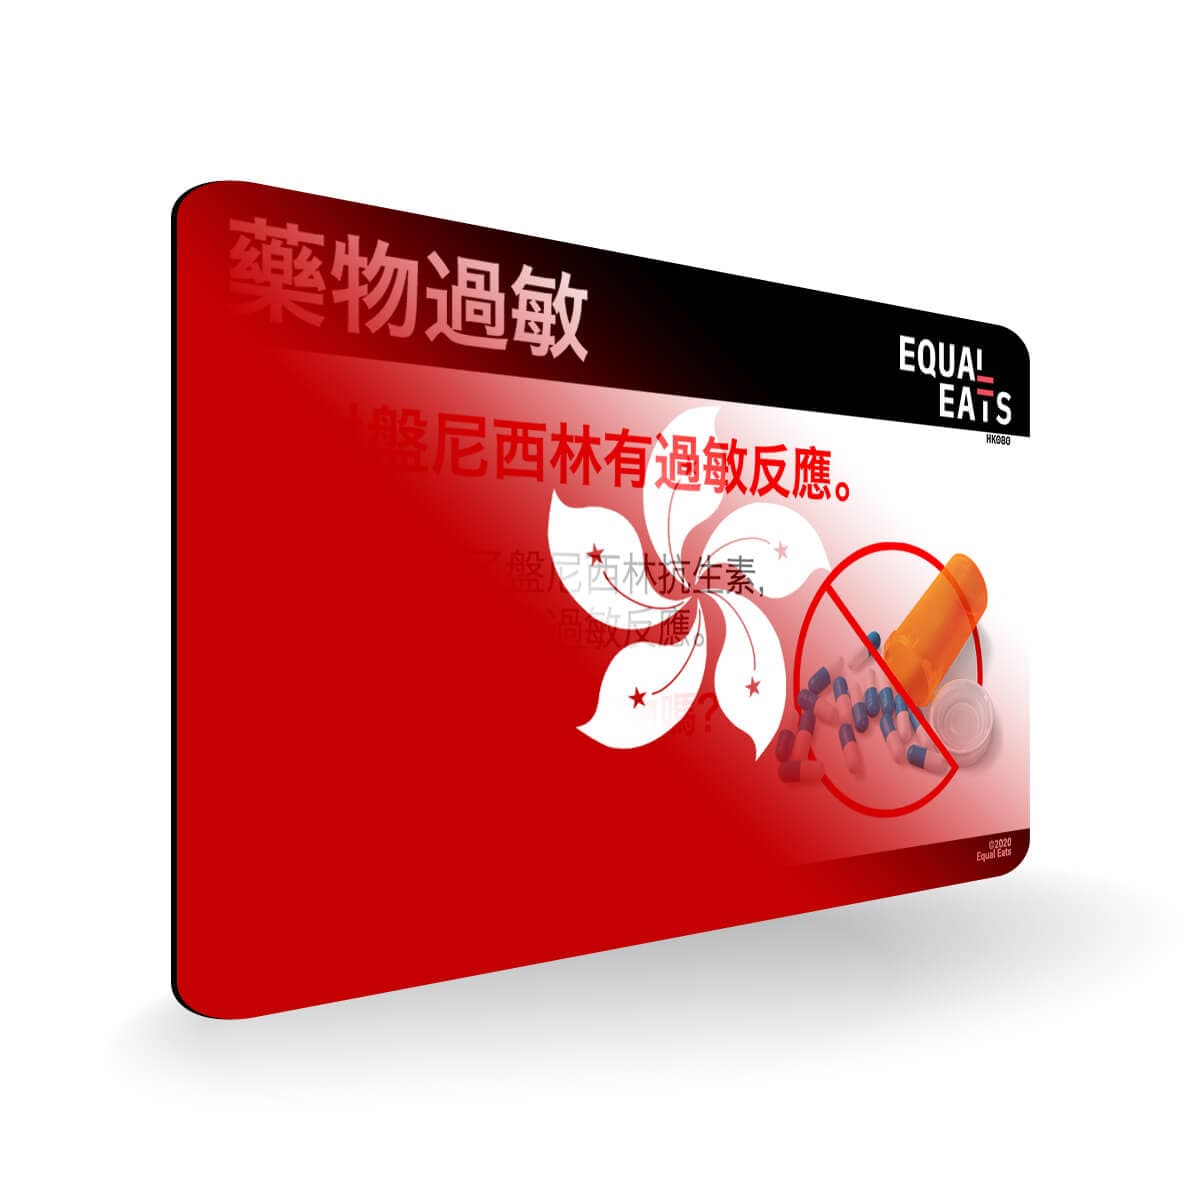 Penicillin Allergy in Traditional Chinese. Penicillin medical ID Card for Hong Kong